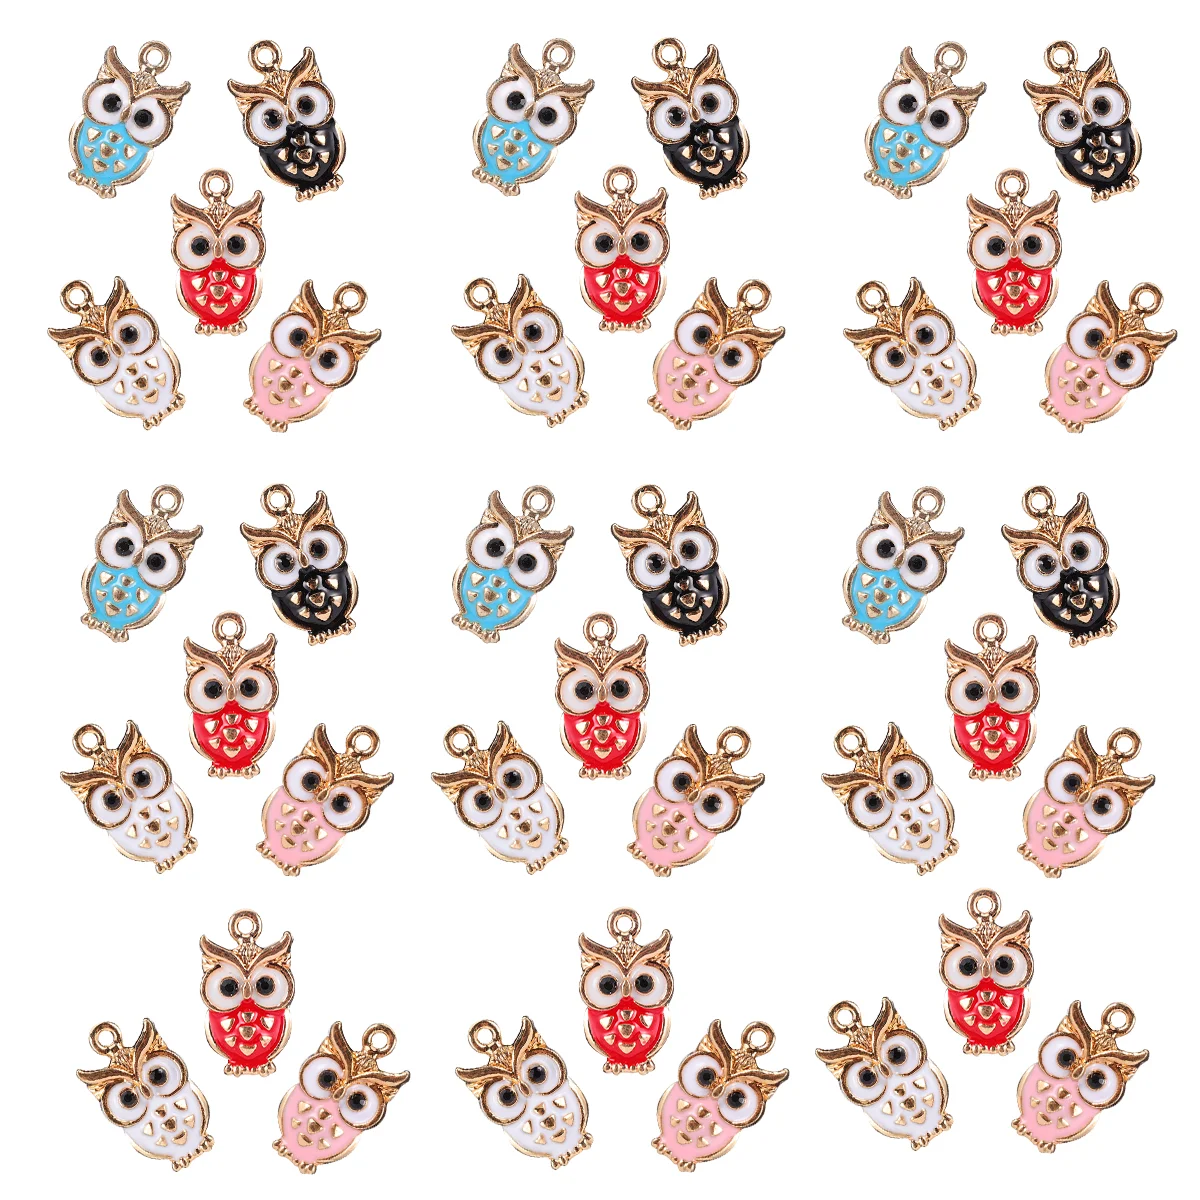 

50 Pcs DIY Making Crafting Accessories Owl Charms Pendant (Random Color)